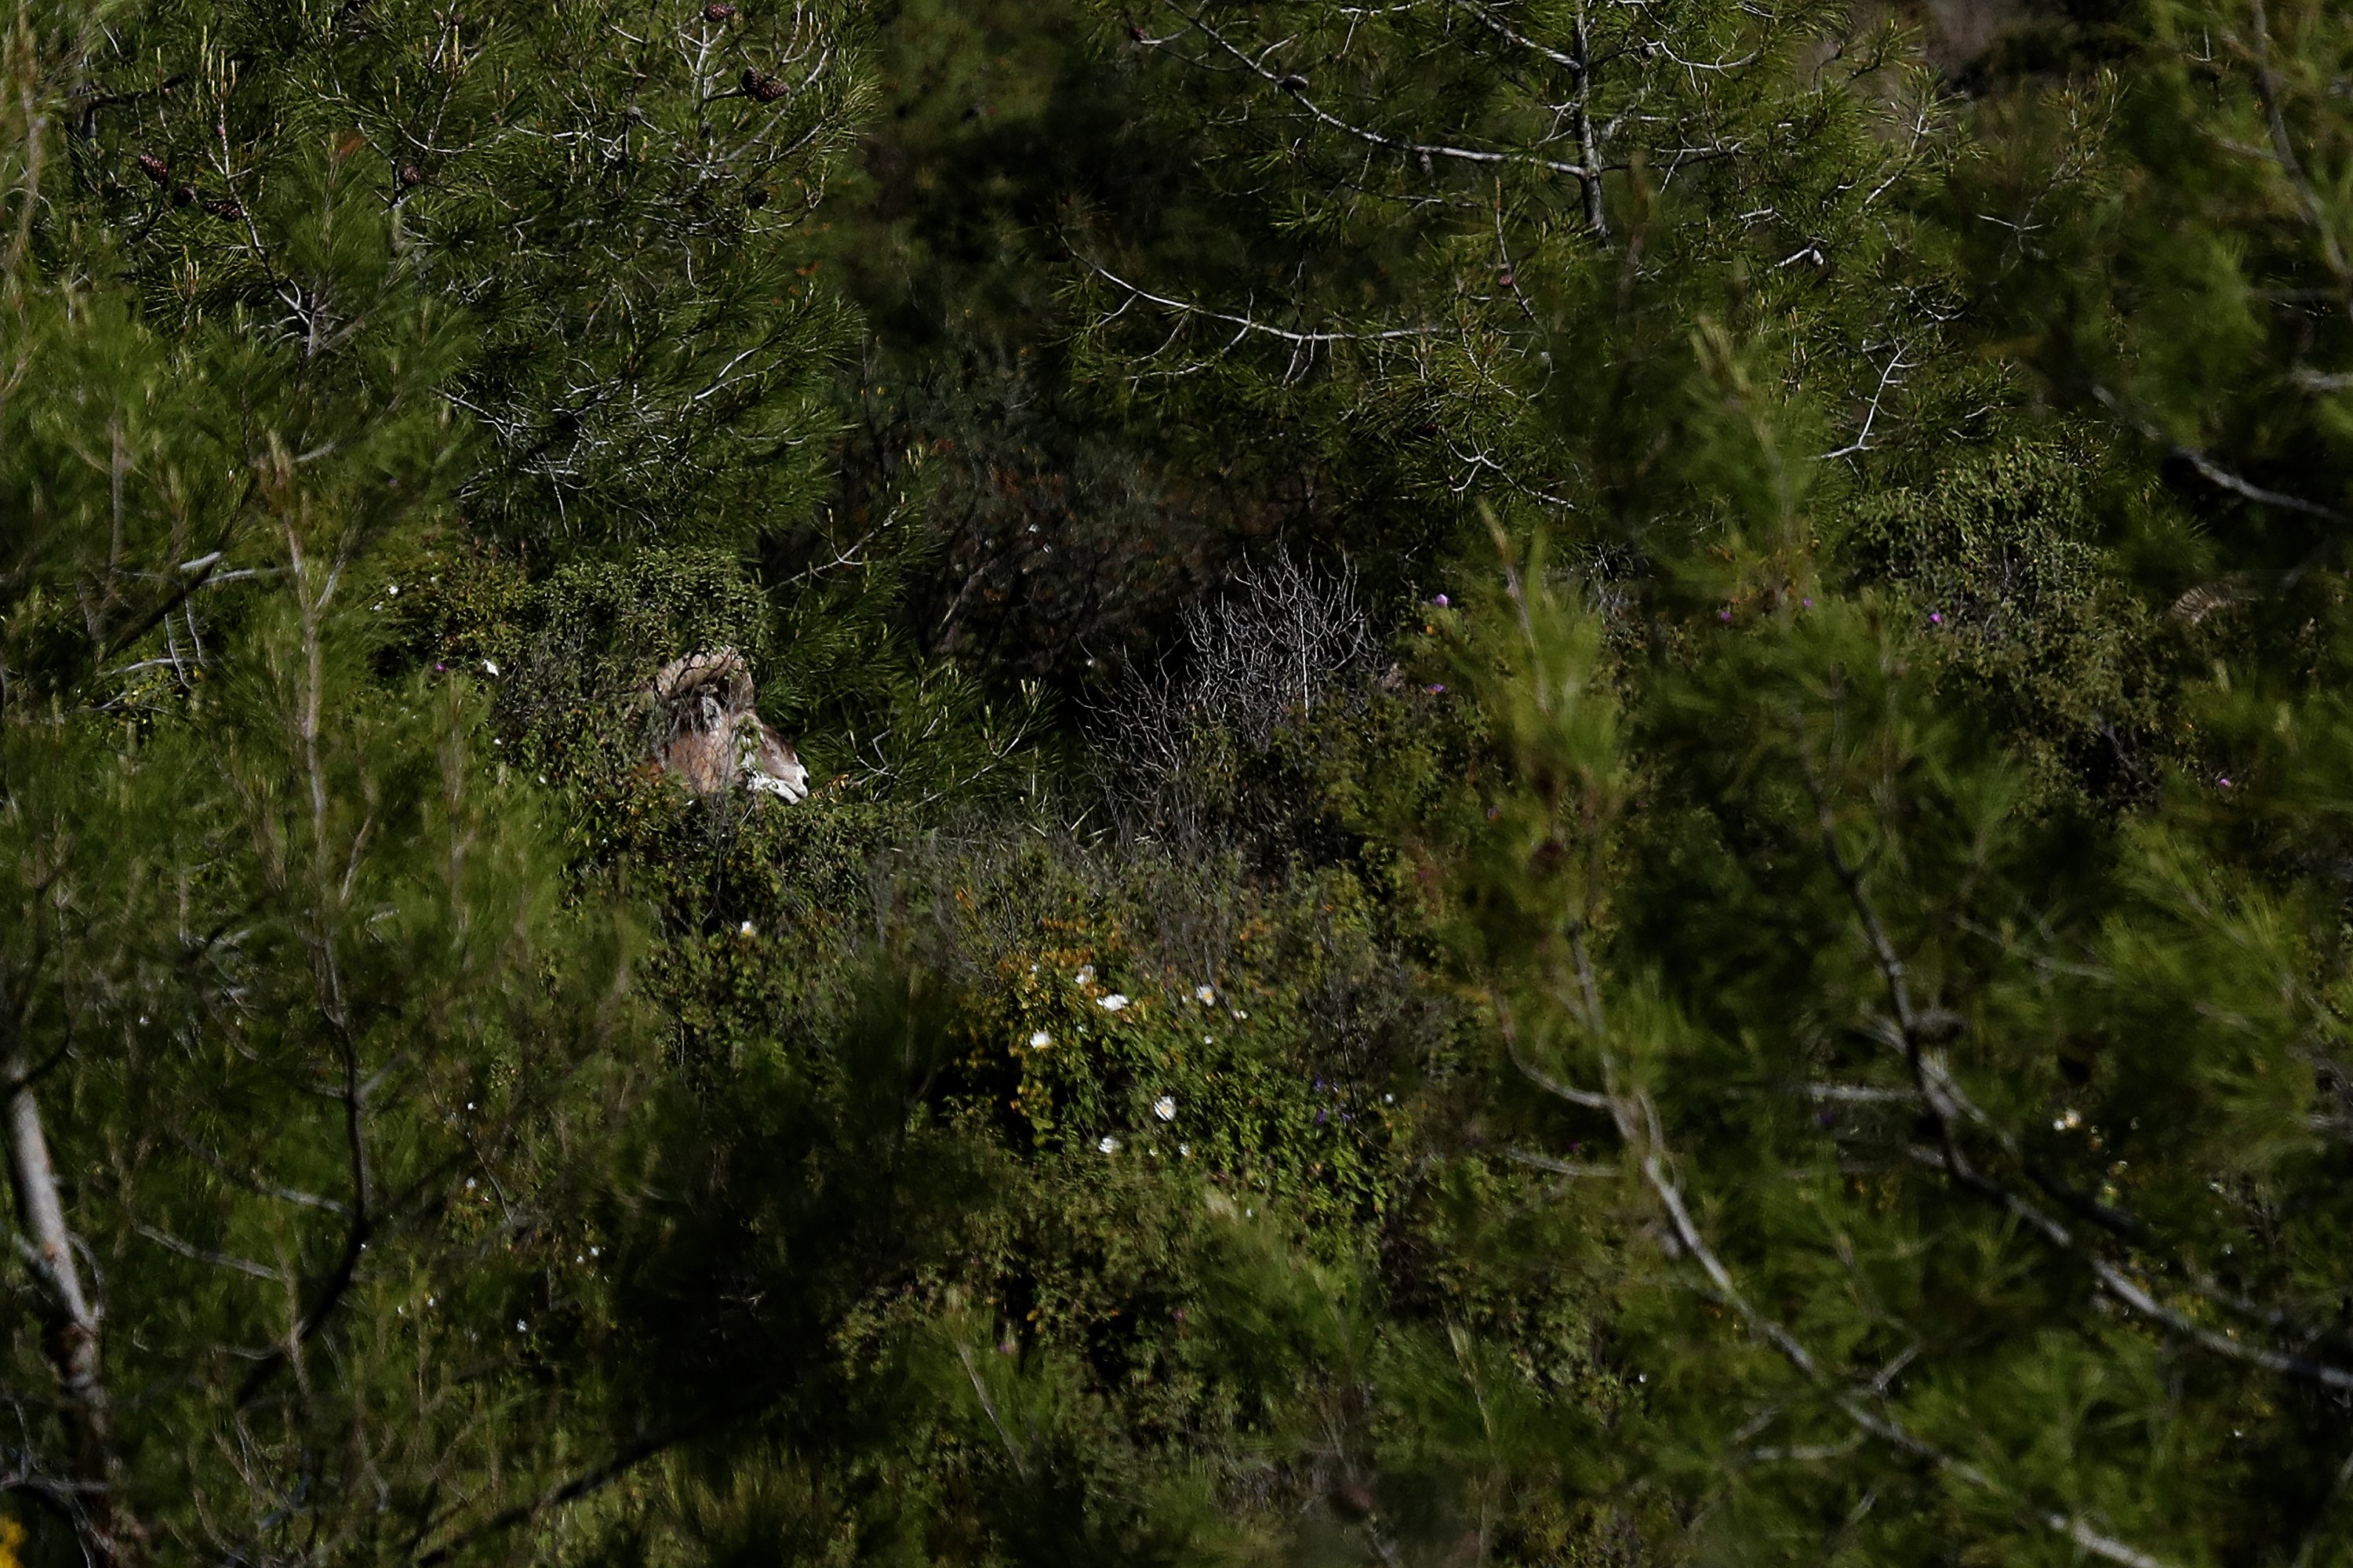 An endangered Mouflon sheep is seen in the forest near the abandoned village of Varisia, inside the U.N.-controlled buffer zone that divides the Greek-controlled south and the Turkish-controlled north, on the island of Cyprus, March 26, 2021. (AP Photo)